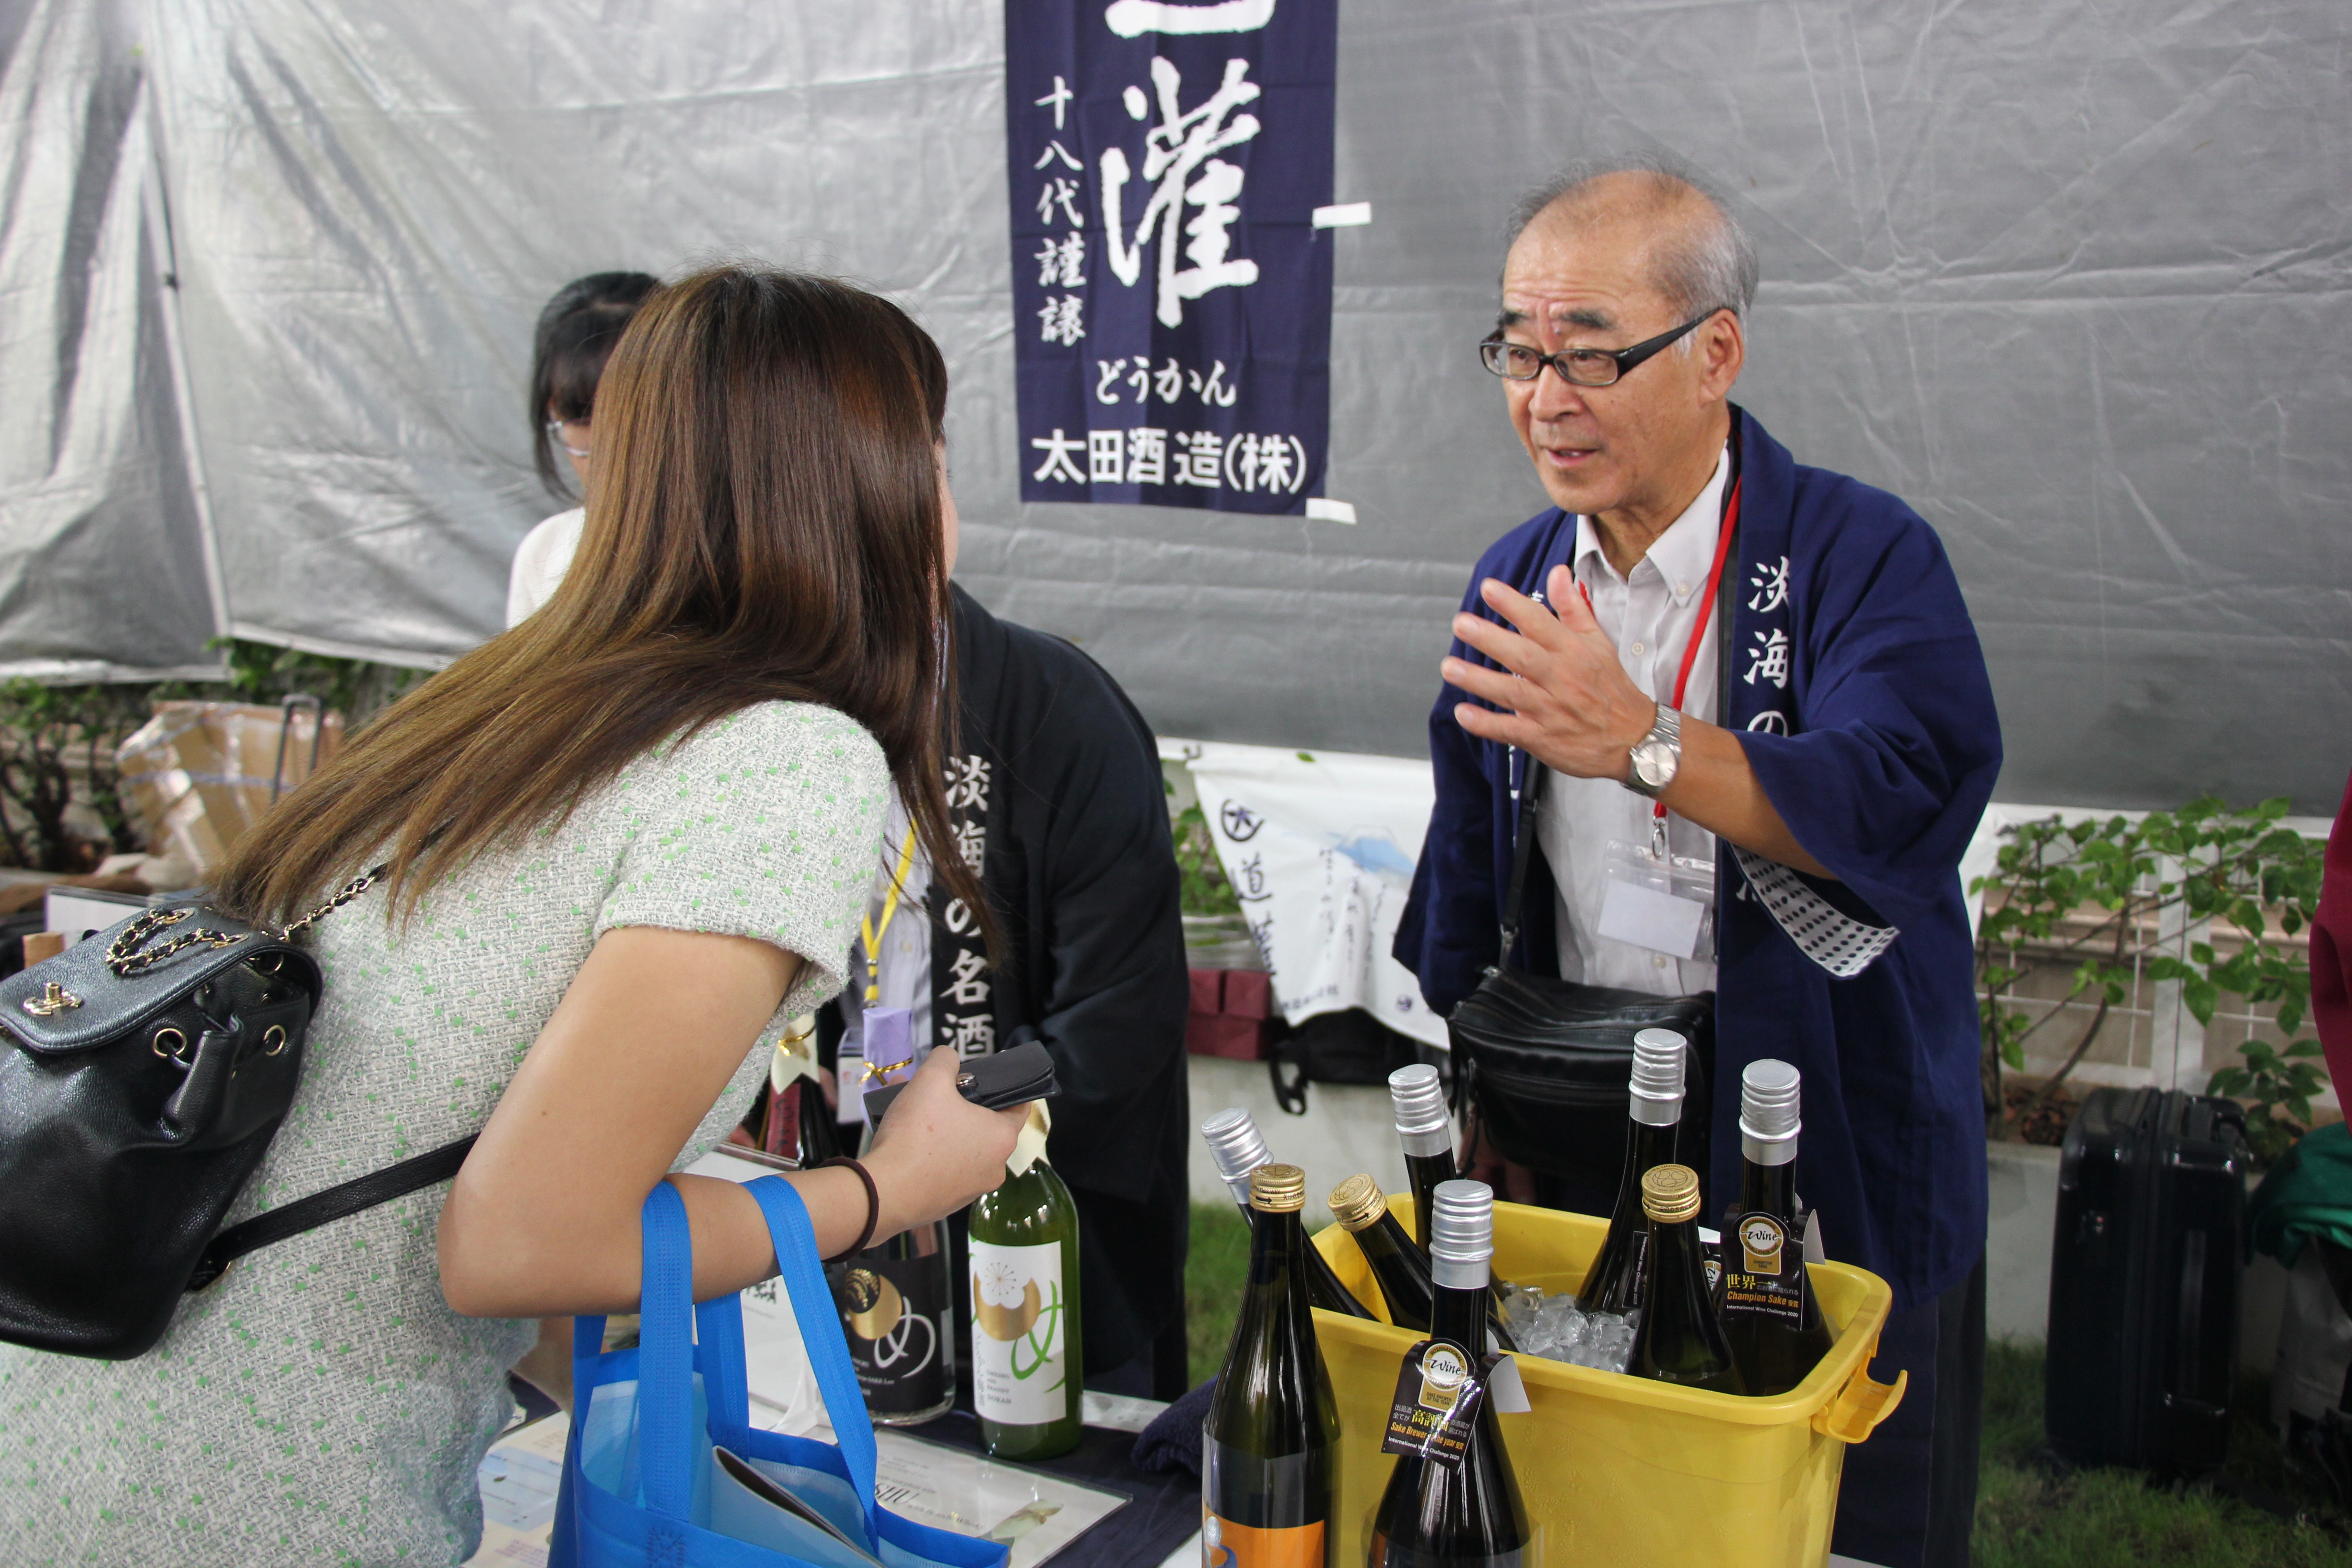 A representative of OTA Shuzou Co. Ltd., one of the 30 breweries introducing sake at the event, introduces his company's products to a visitor. Photo: Ngoc Dong / Tuoi Tre News